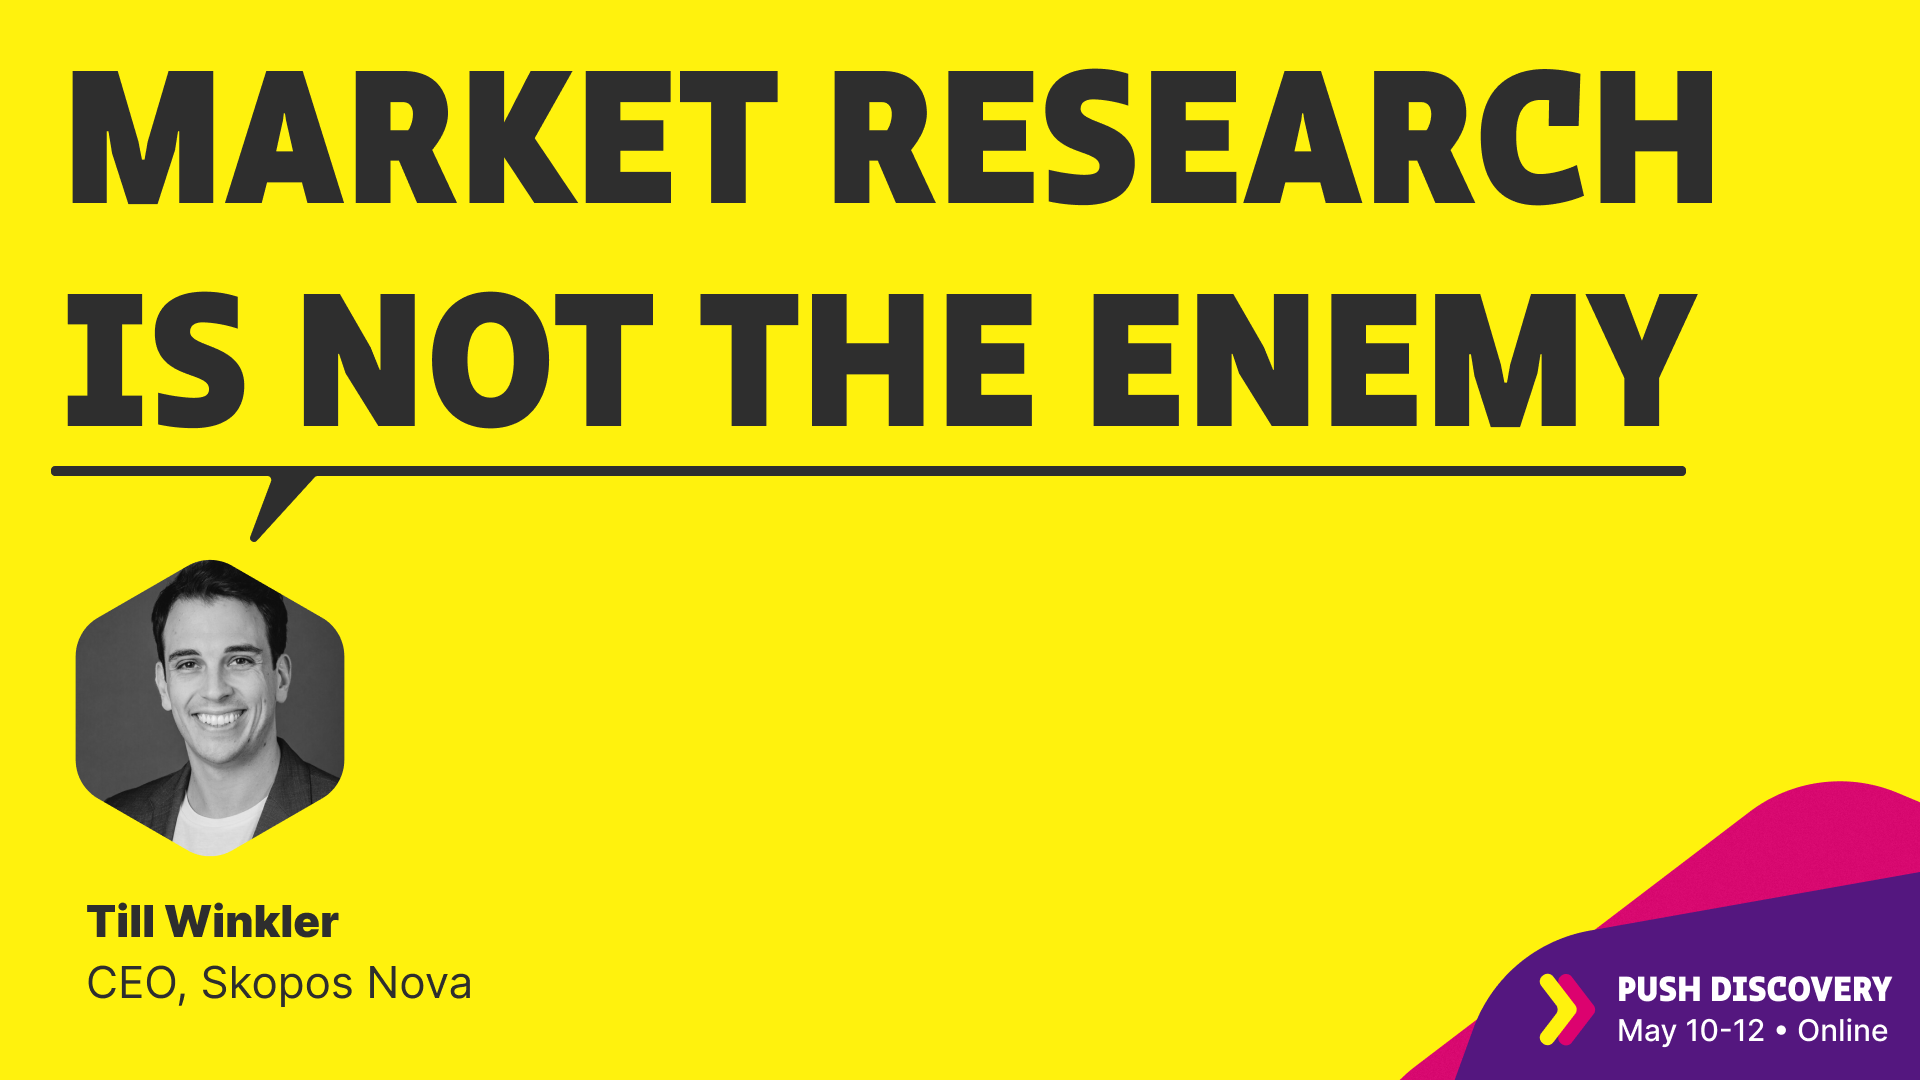 Market research is not the enemy